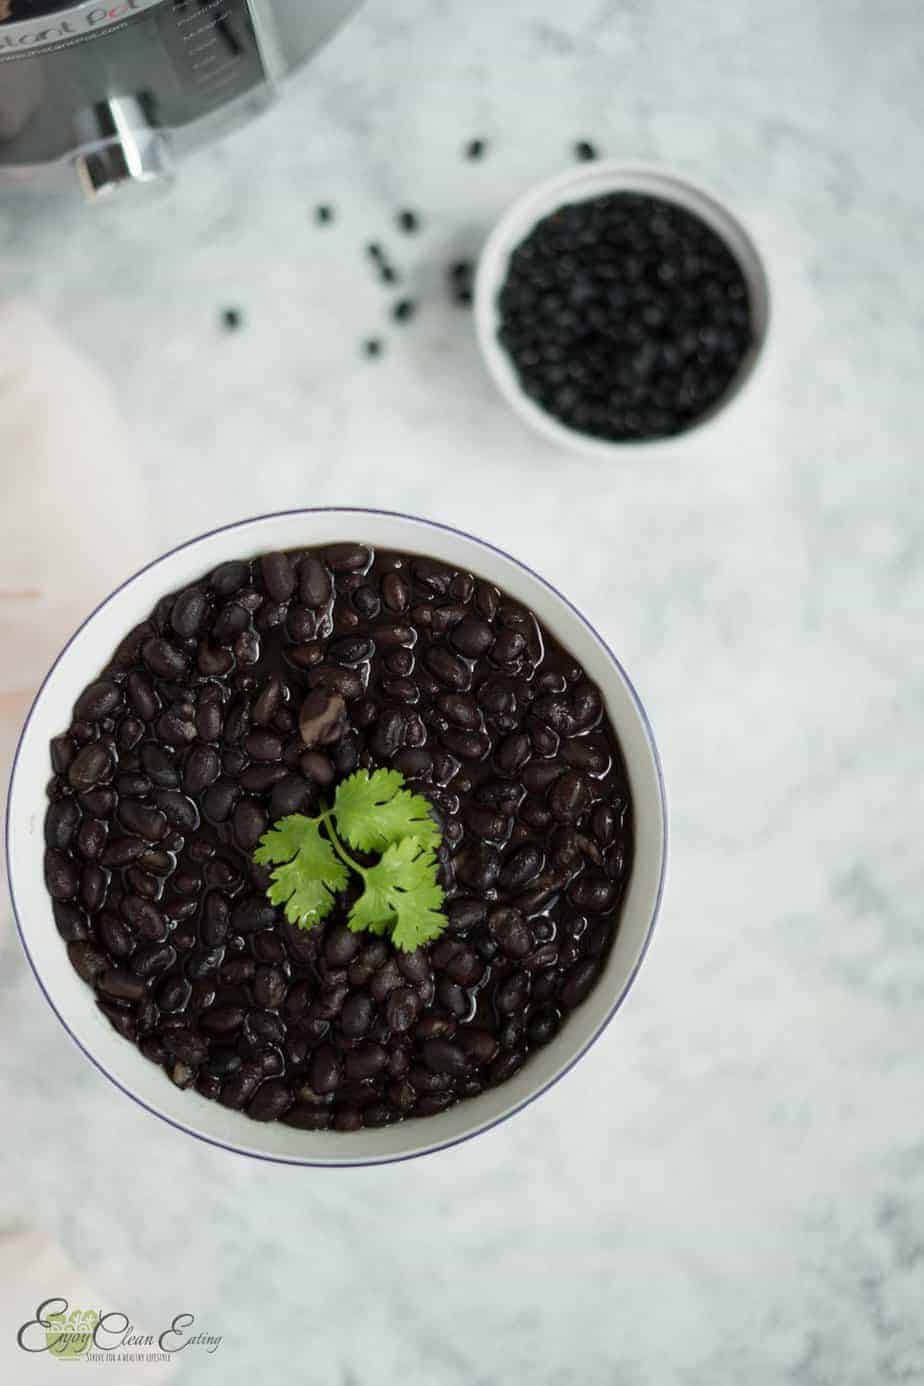 instant pot black beans no soak needed and fully cook to perfection, ready to use on baking, soup or stew.